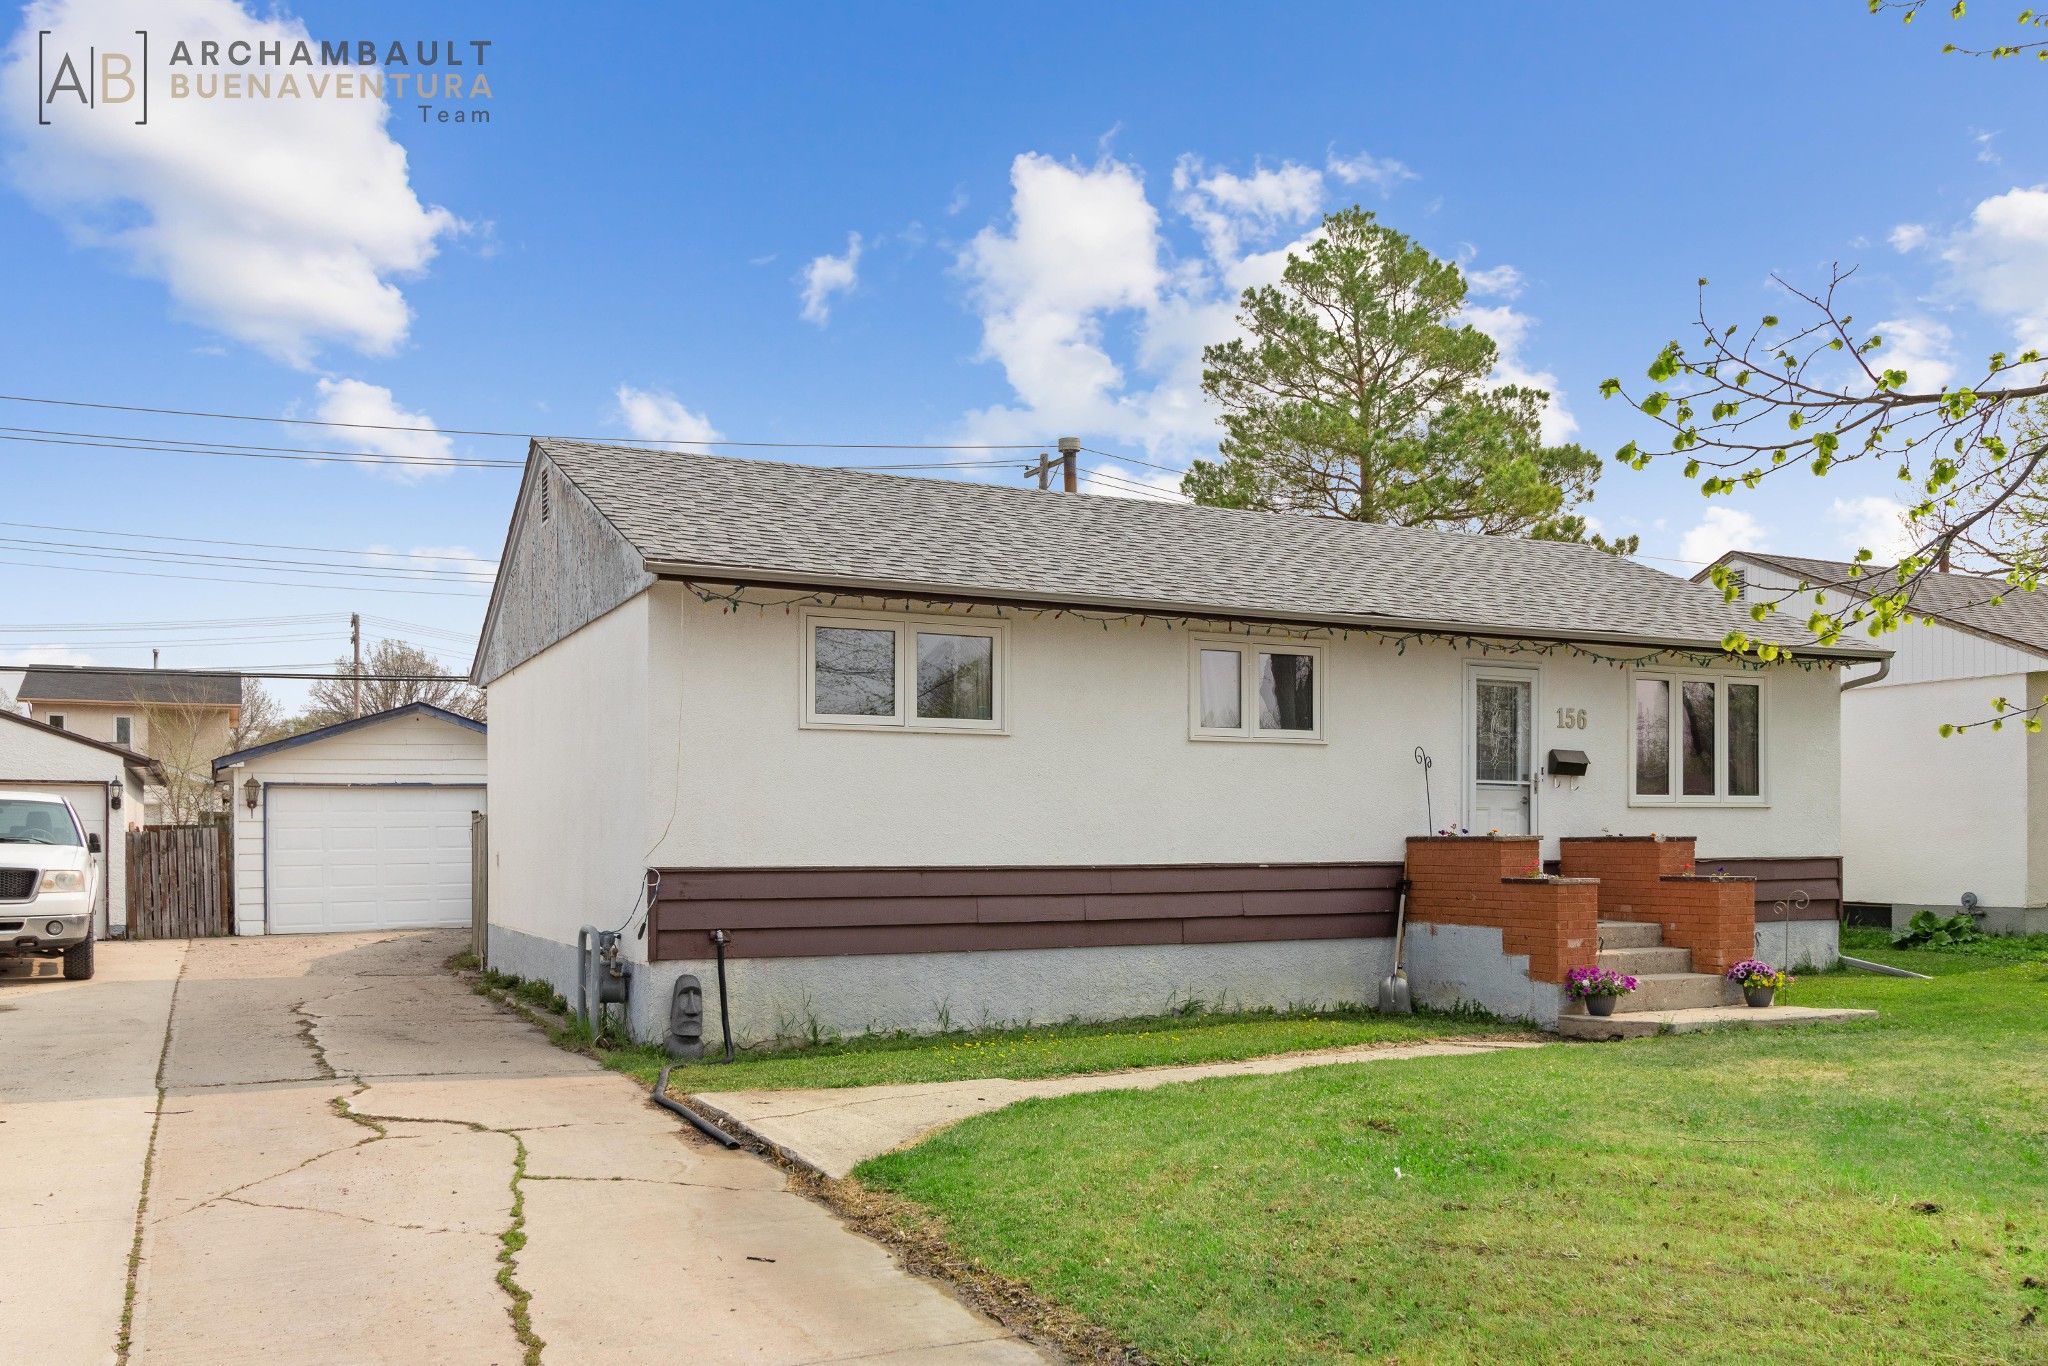 Open House. Open House on Thursday, May 18, 2023 6:00PM - 8:00PM
North Kildonan home with 3 bed &amp; 2 Bath!
3 Bed bung on a 55' wide lot. Original hardwood floors, windows (2016), Shingles (2019), AC (2019) Furnace (2023) and so much more! Backyard is c